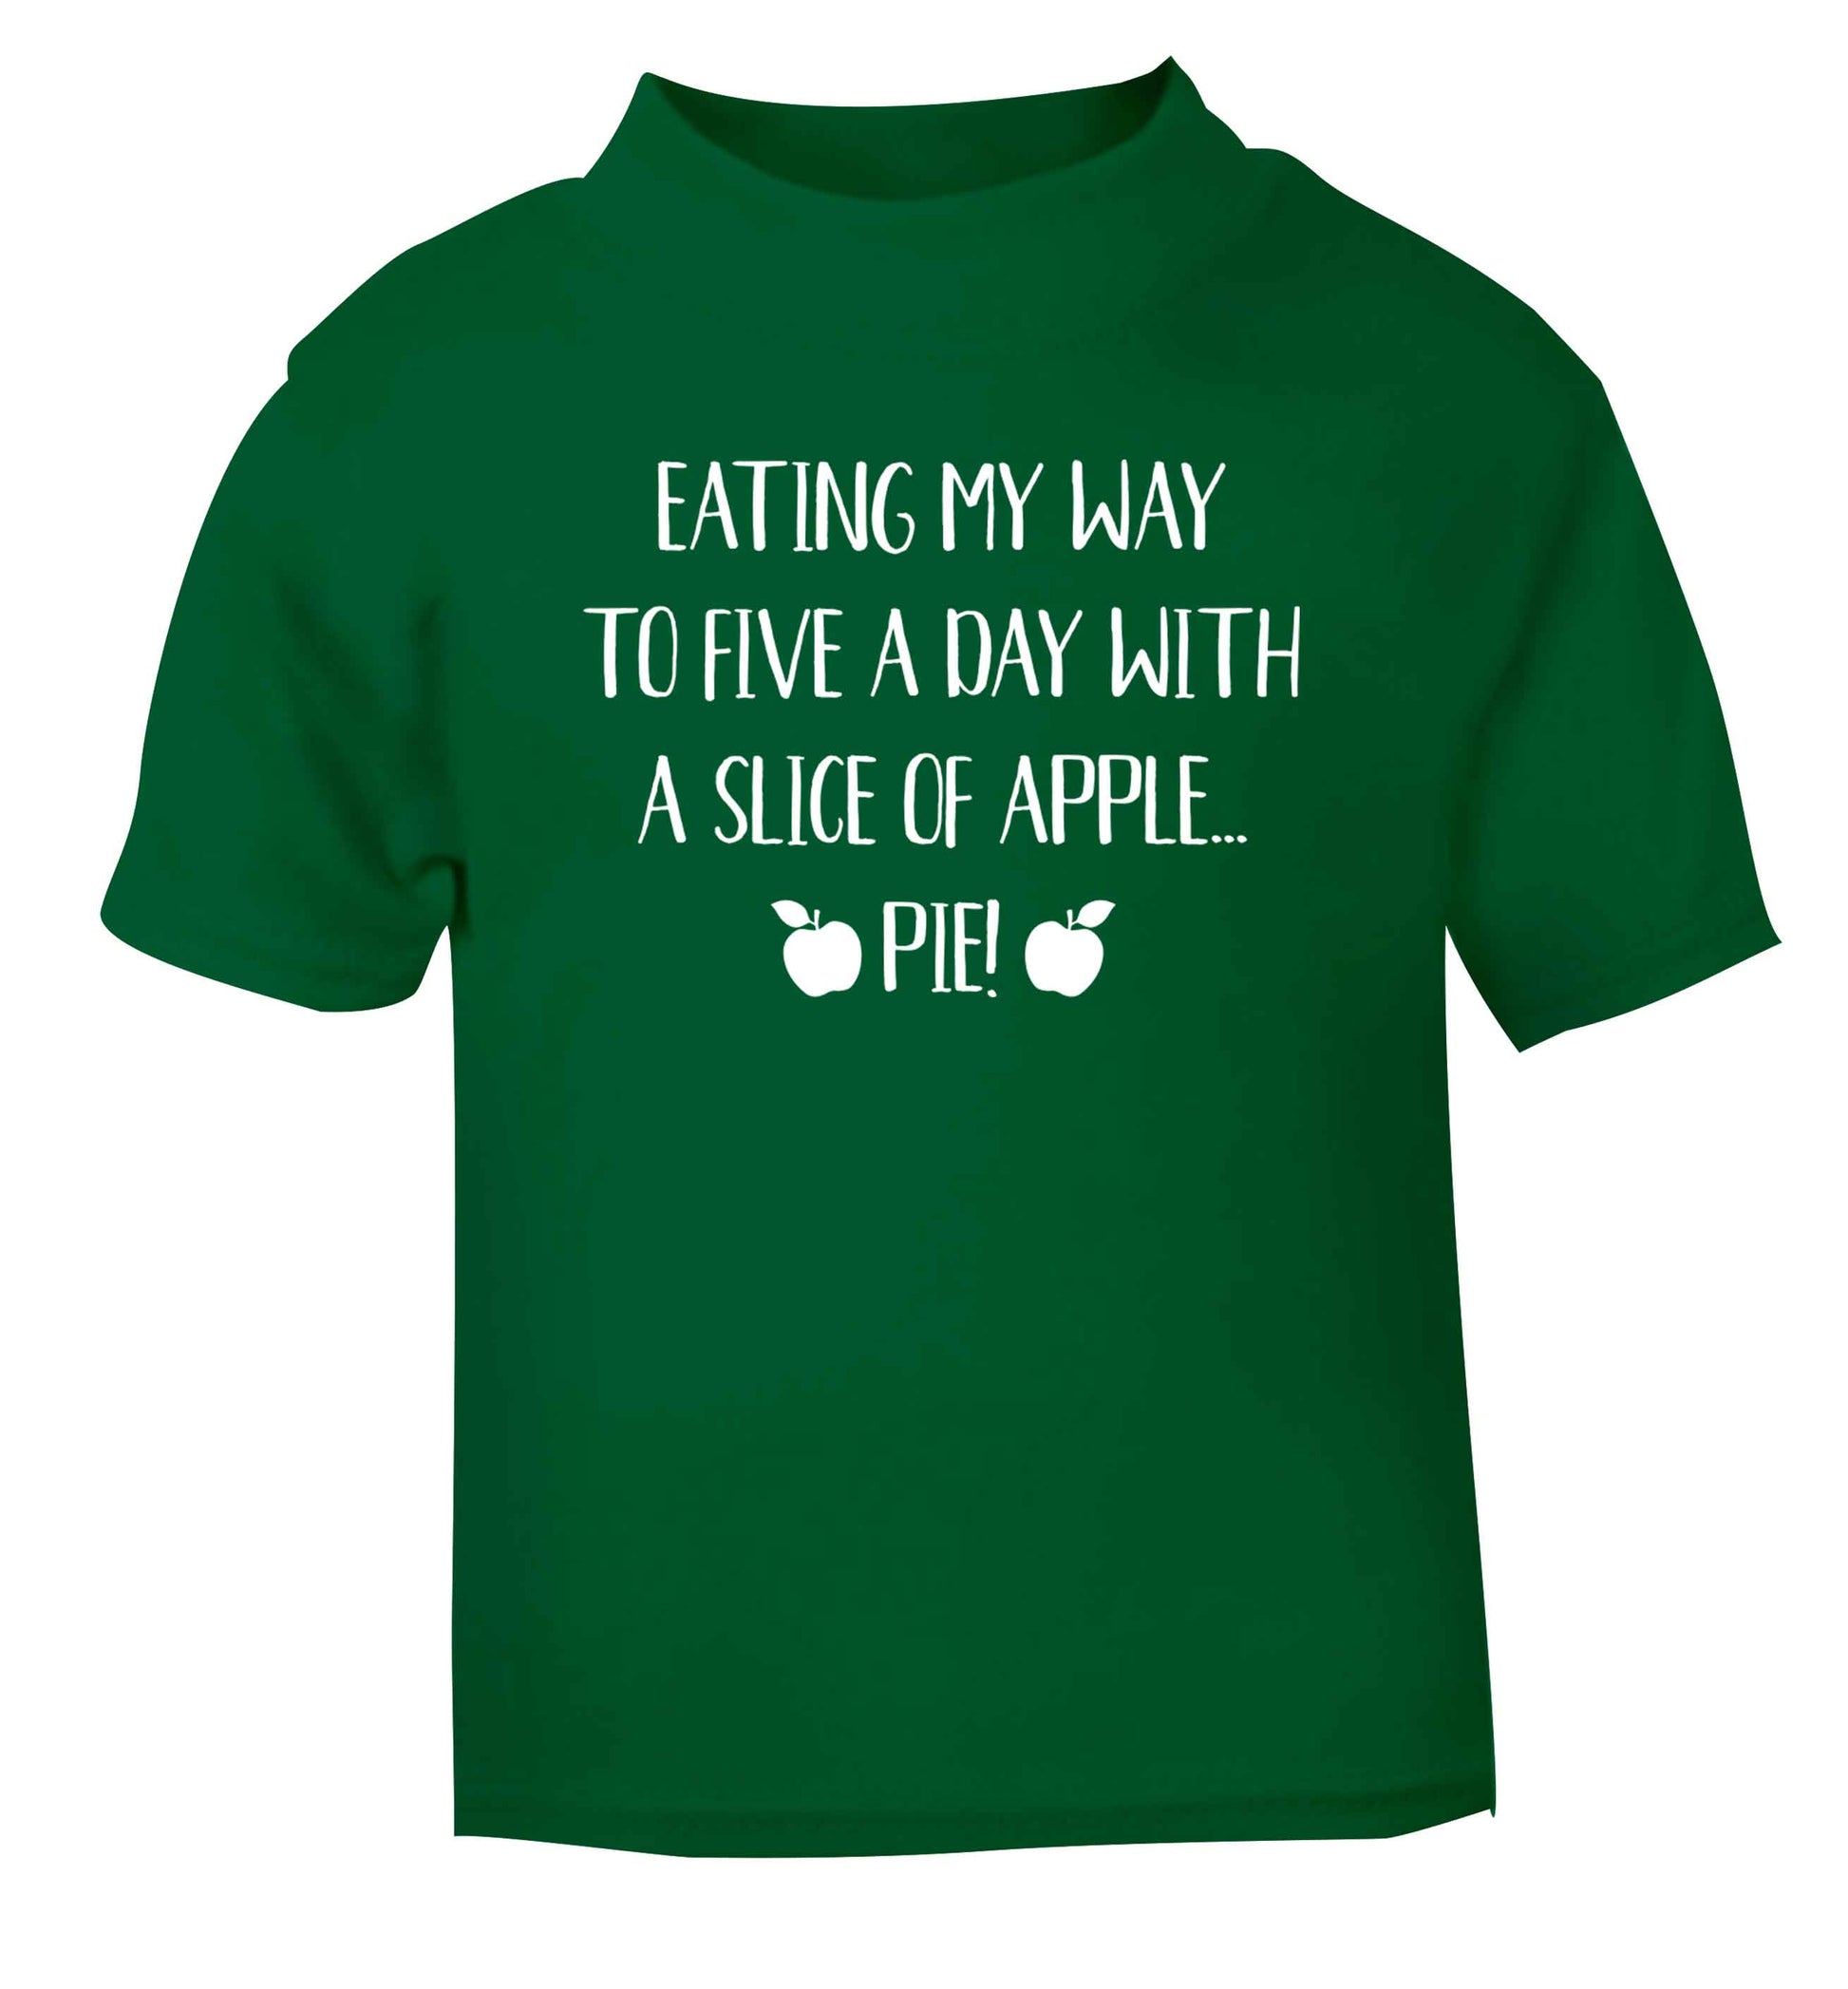 Eating my way to five a day with a slice of apple pie green Baby Toddler Tshirt 2 Years